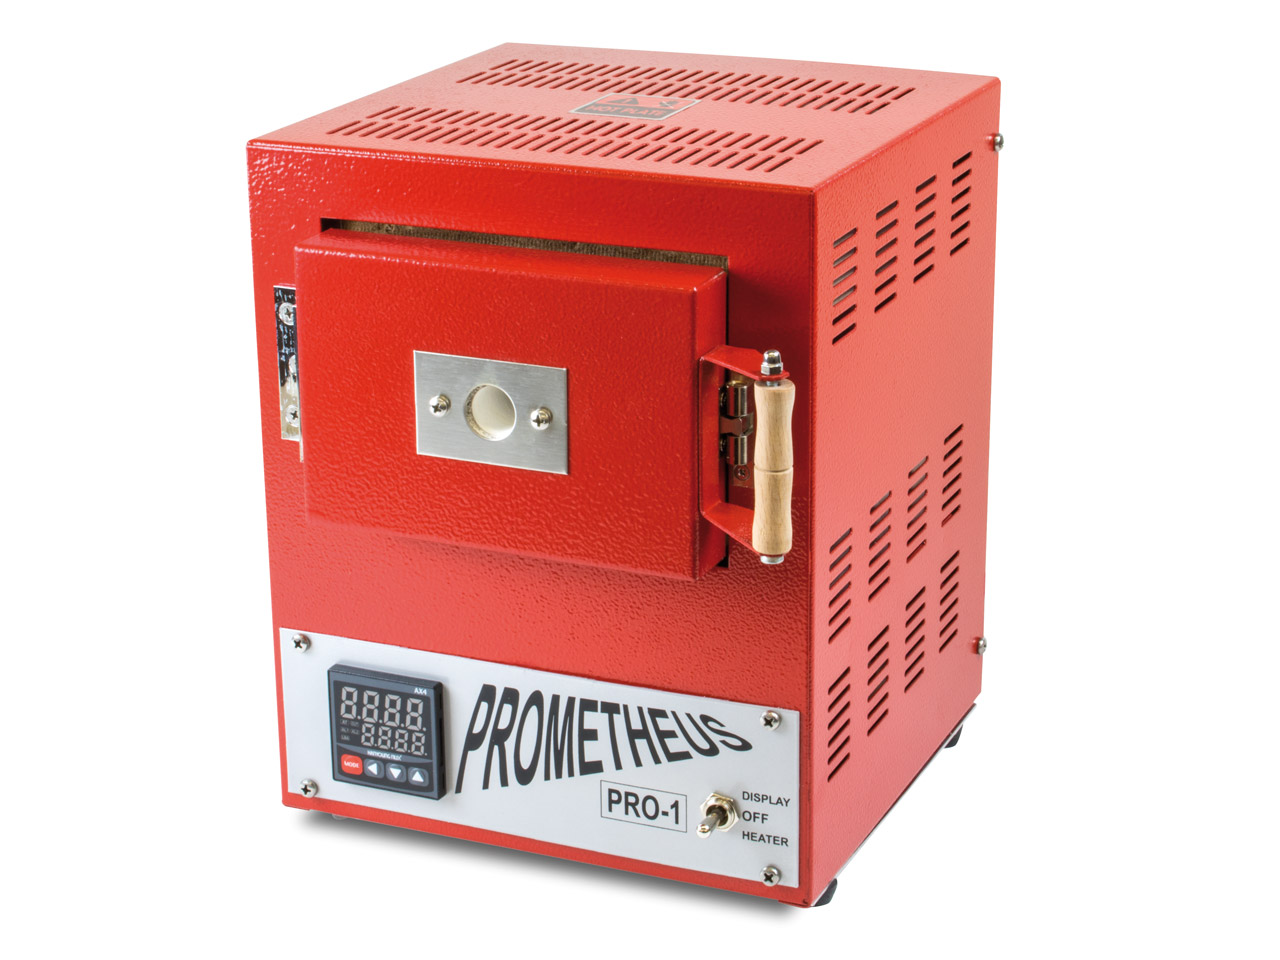 Prometheus Mini Kiln PRO-1 With Digital Controller Questions & Answers